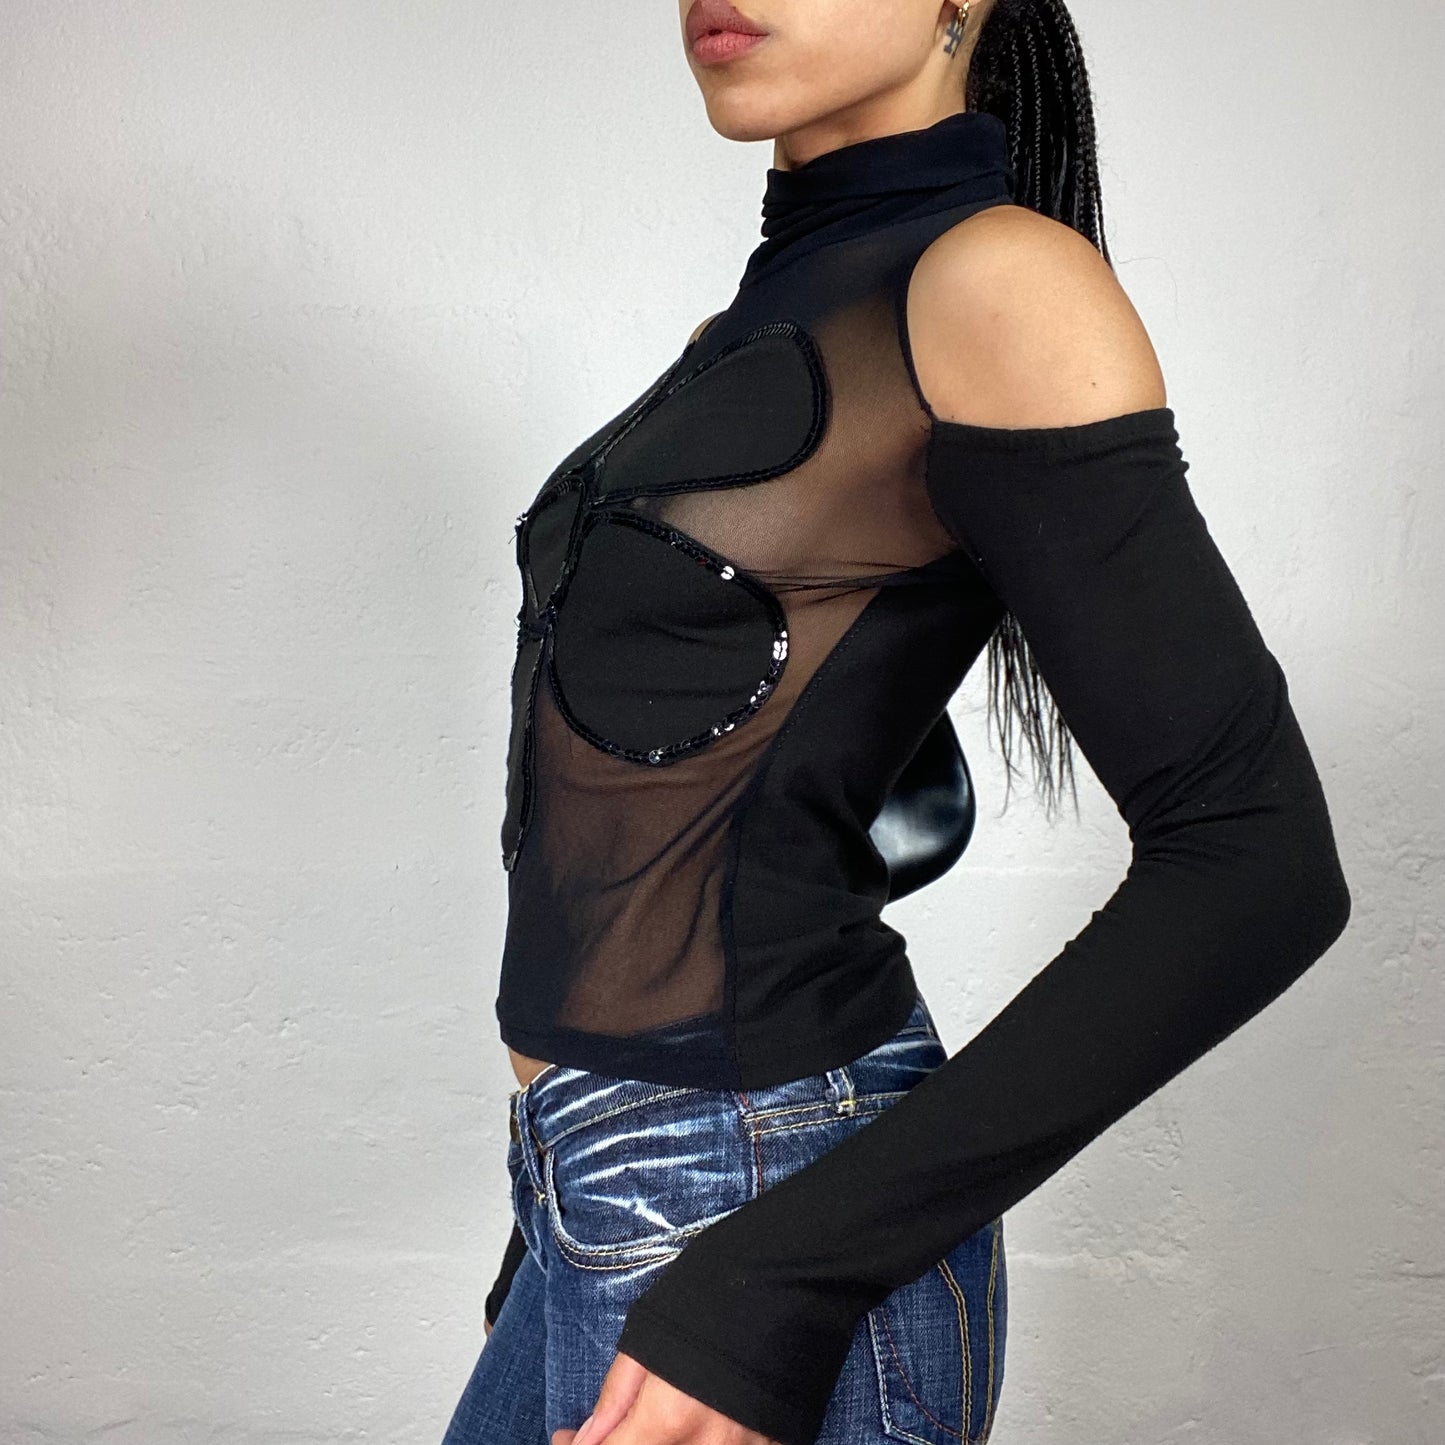 Vintage 2000's Popstar Black Longsleeve Open Shoulders Turtleneck Mesh Front Top with Sequin Decorated Flower Embroidery (S)